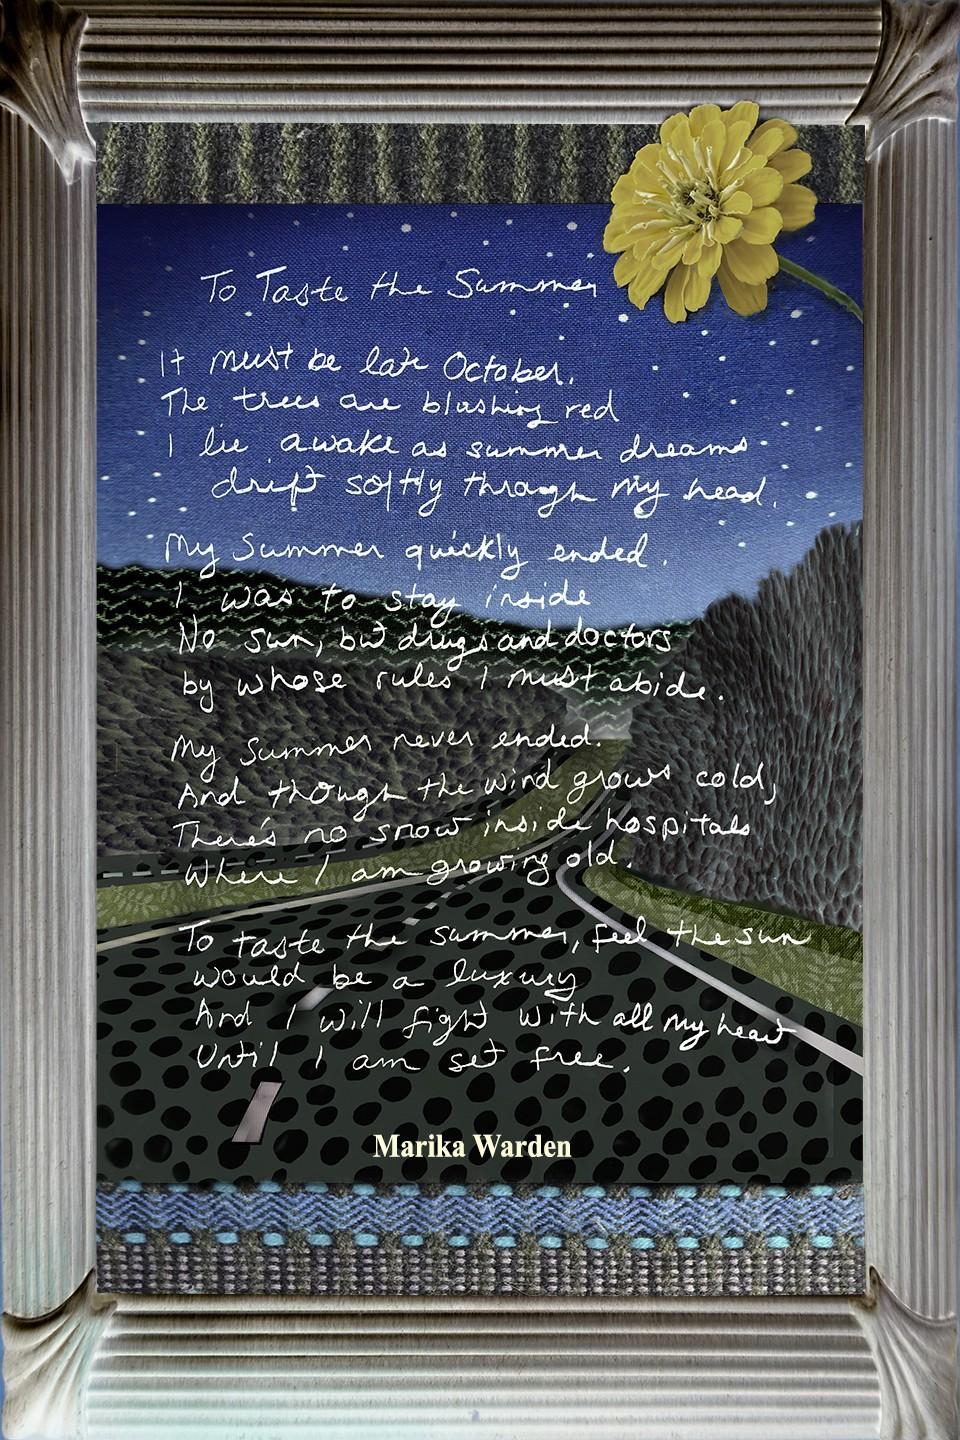 Robin Botie of Ithaca, New York, photoshops her daughter's poem onto a scene of driving the highway at night.